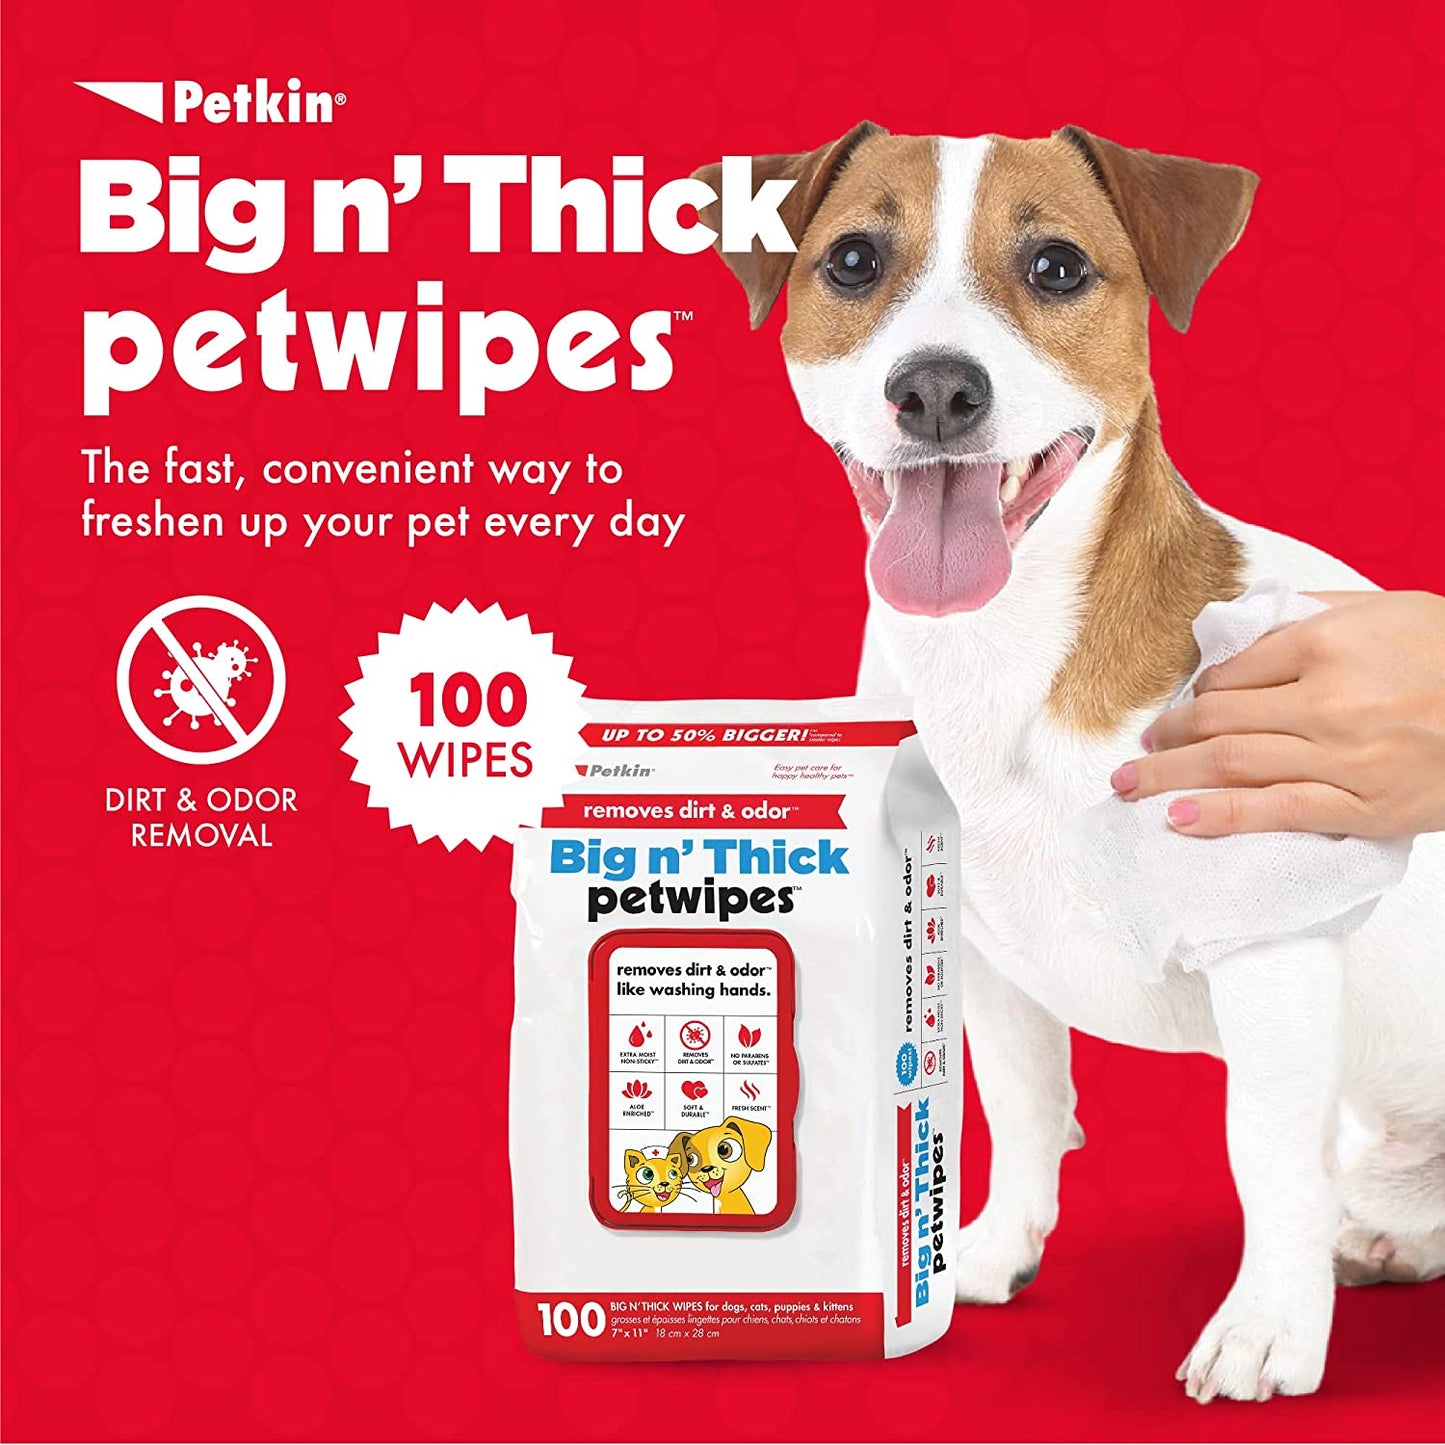 Pet Wipes for Dogs and Cats, 100 Large Wipes - Removes Dirt & Odor like Washing Hands - Cleans Ears, Face, Butt, Eye Area - Convenient, Ideal for Home or Travel - 1 Pack of 100 Wipes